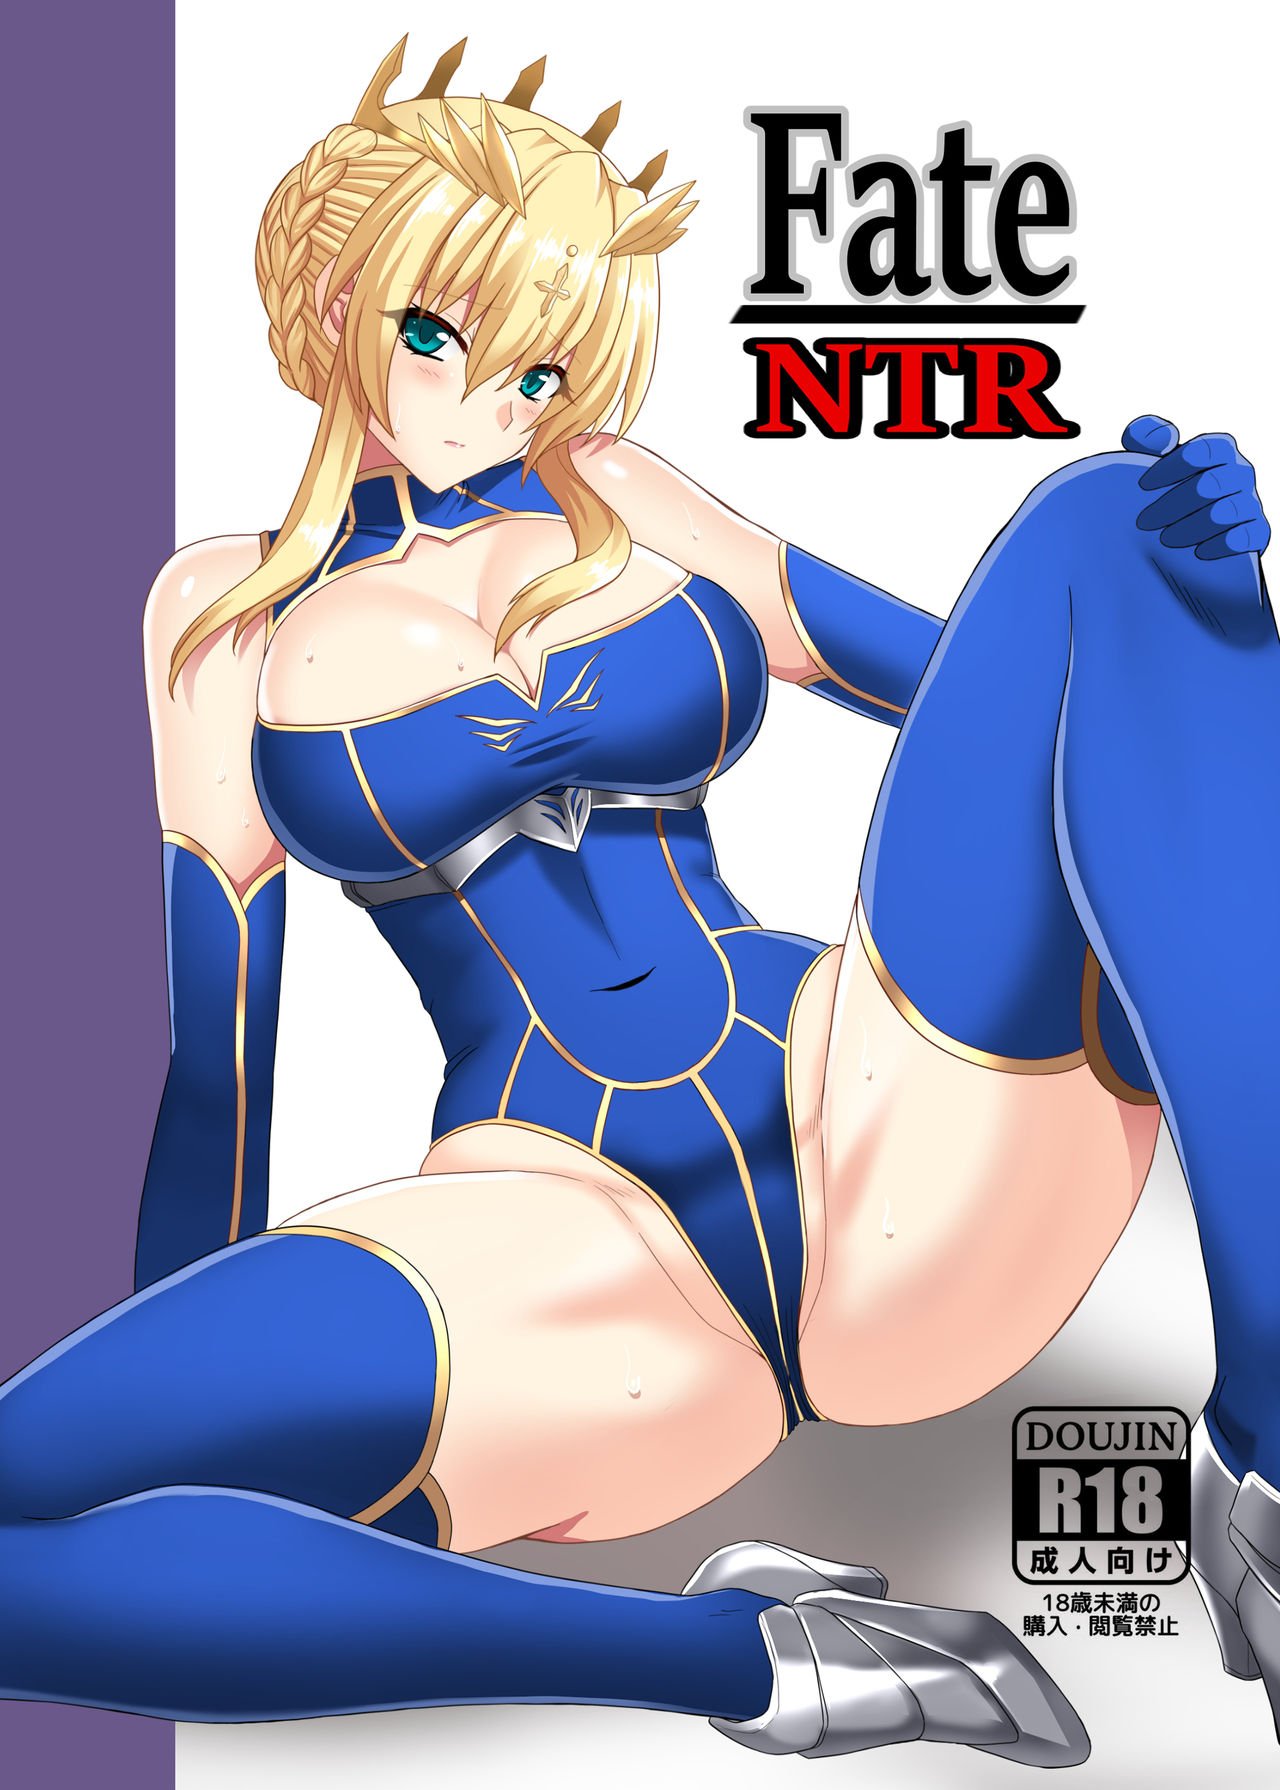 [Hell and Heaven] Fate/NTR (Fate/Grand Order) [Chinese] [空気系☆漢化] [Digital] [ヘルアンドヘブン] Fate/NTR (Fate/Grand Order) [中国翻訳] [DL版]